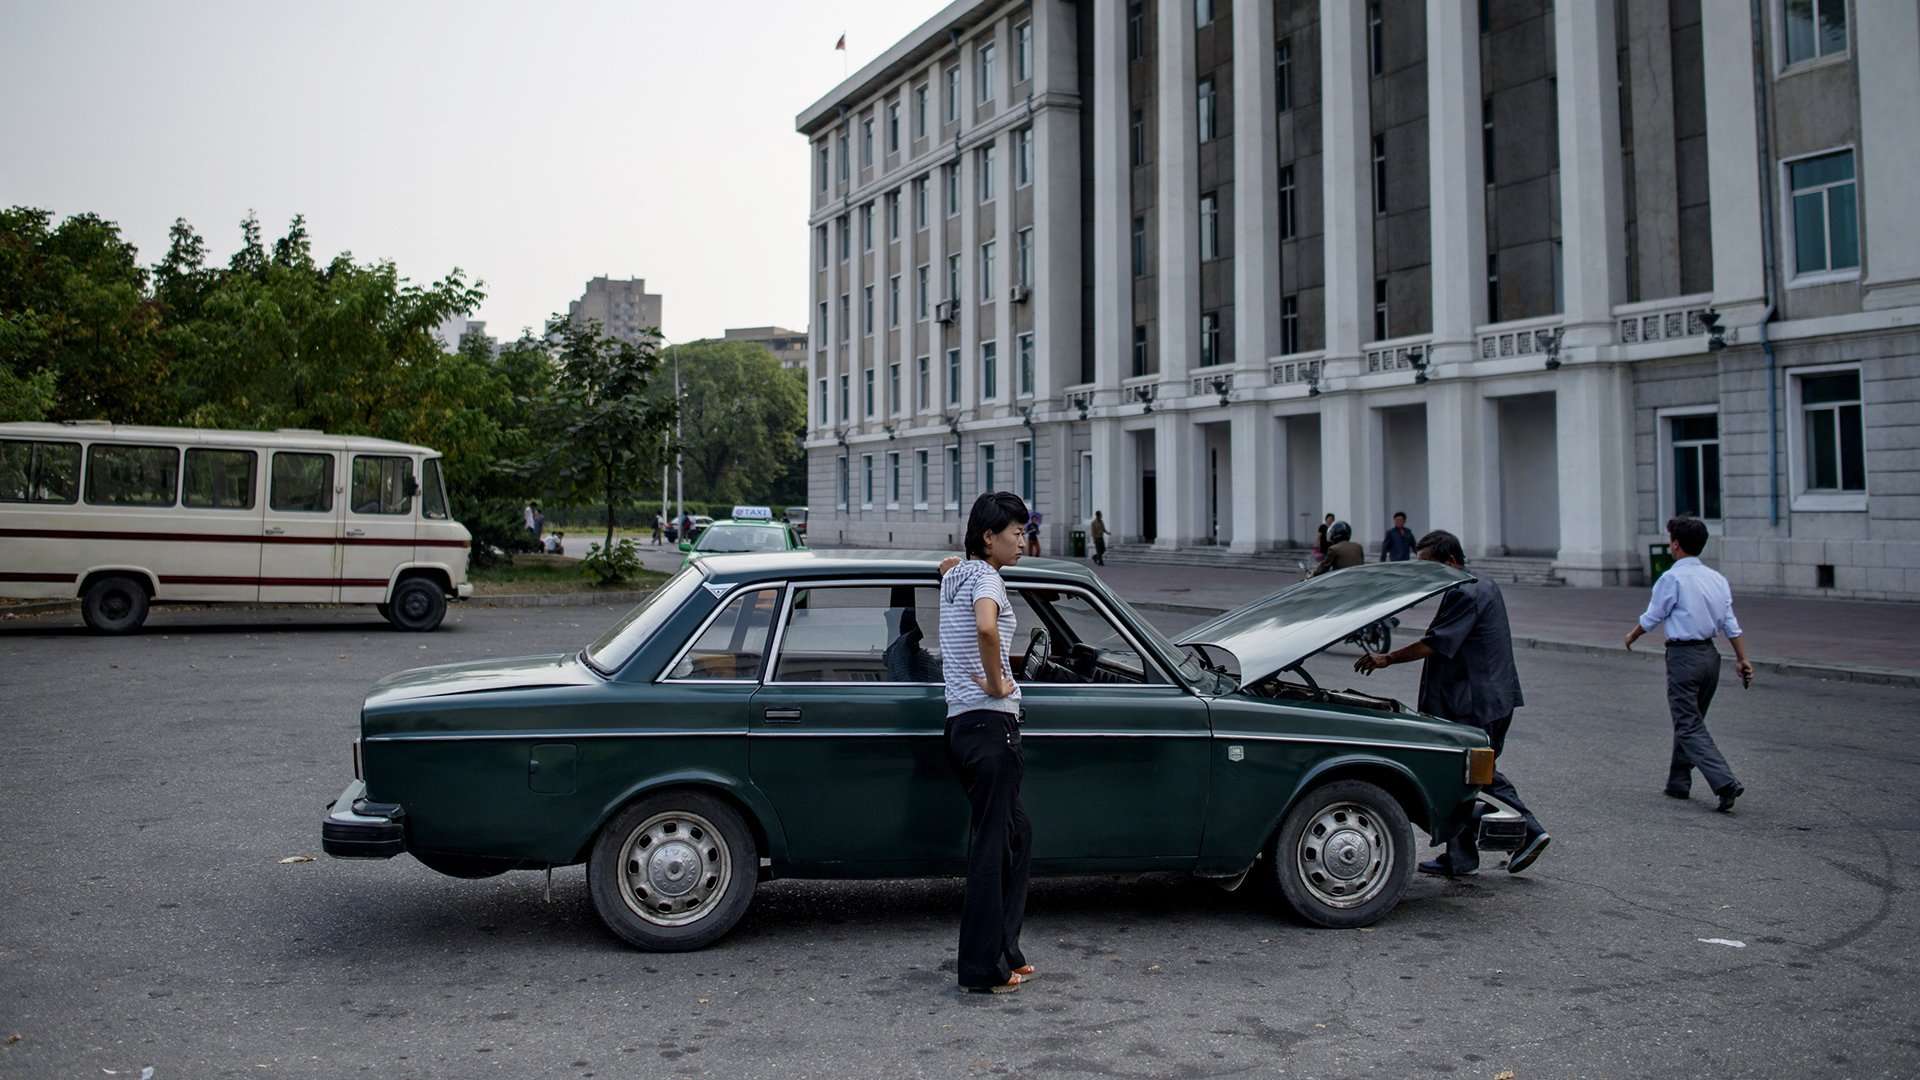 image for This Is How North Korea Once Stole 1,000 Volvos from Sweden